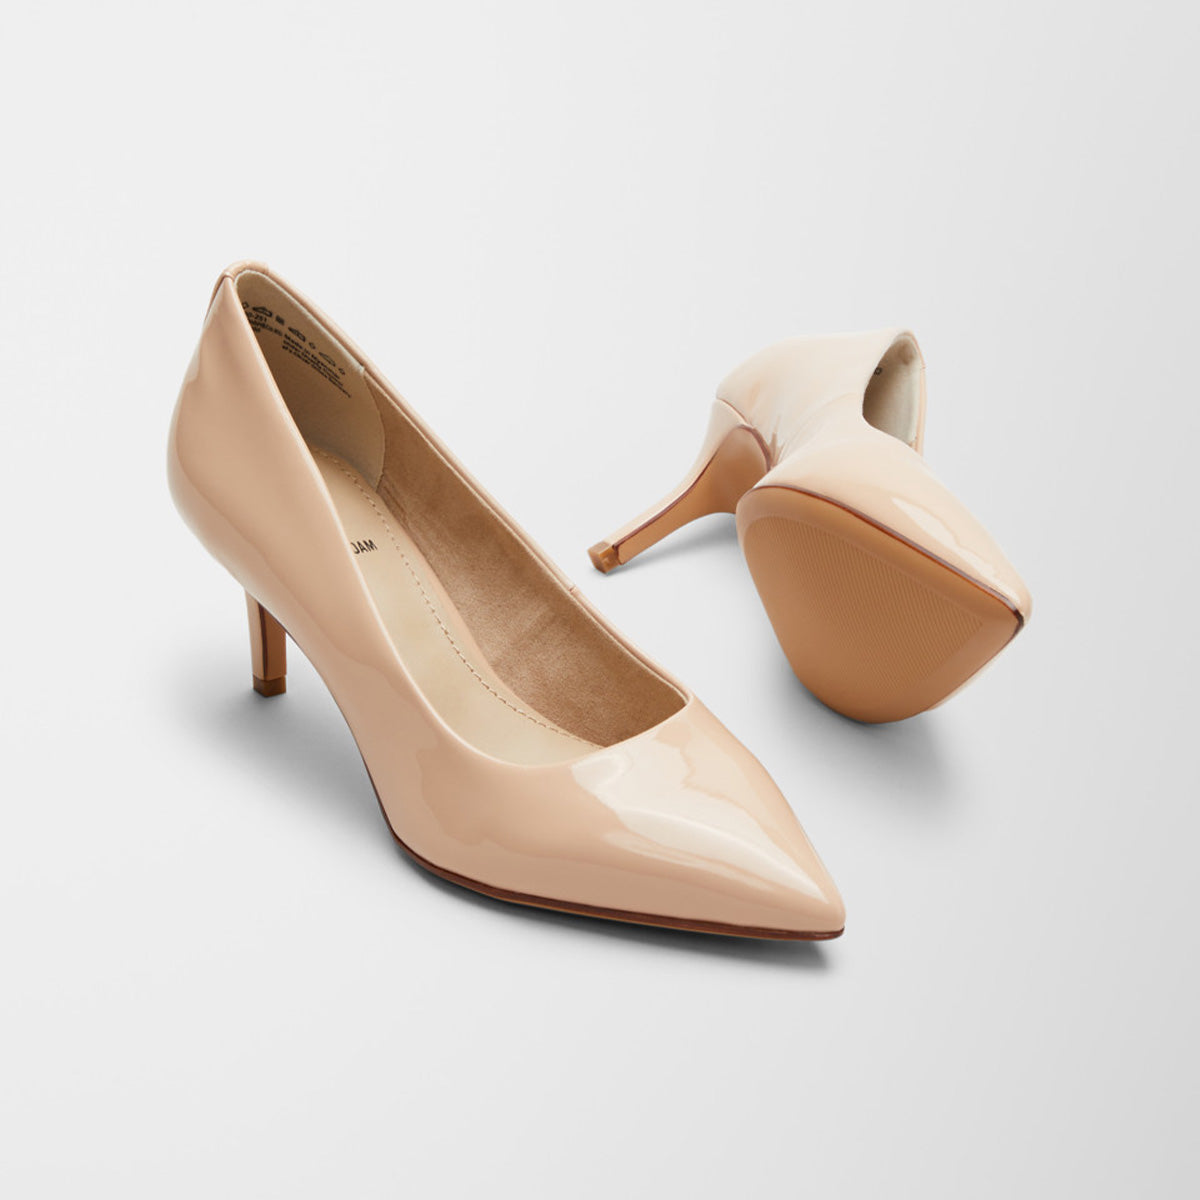 Sophisticated Nude Pump with Studs